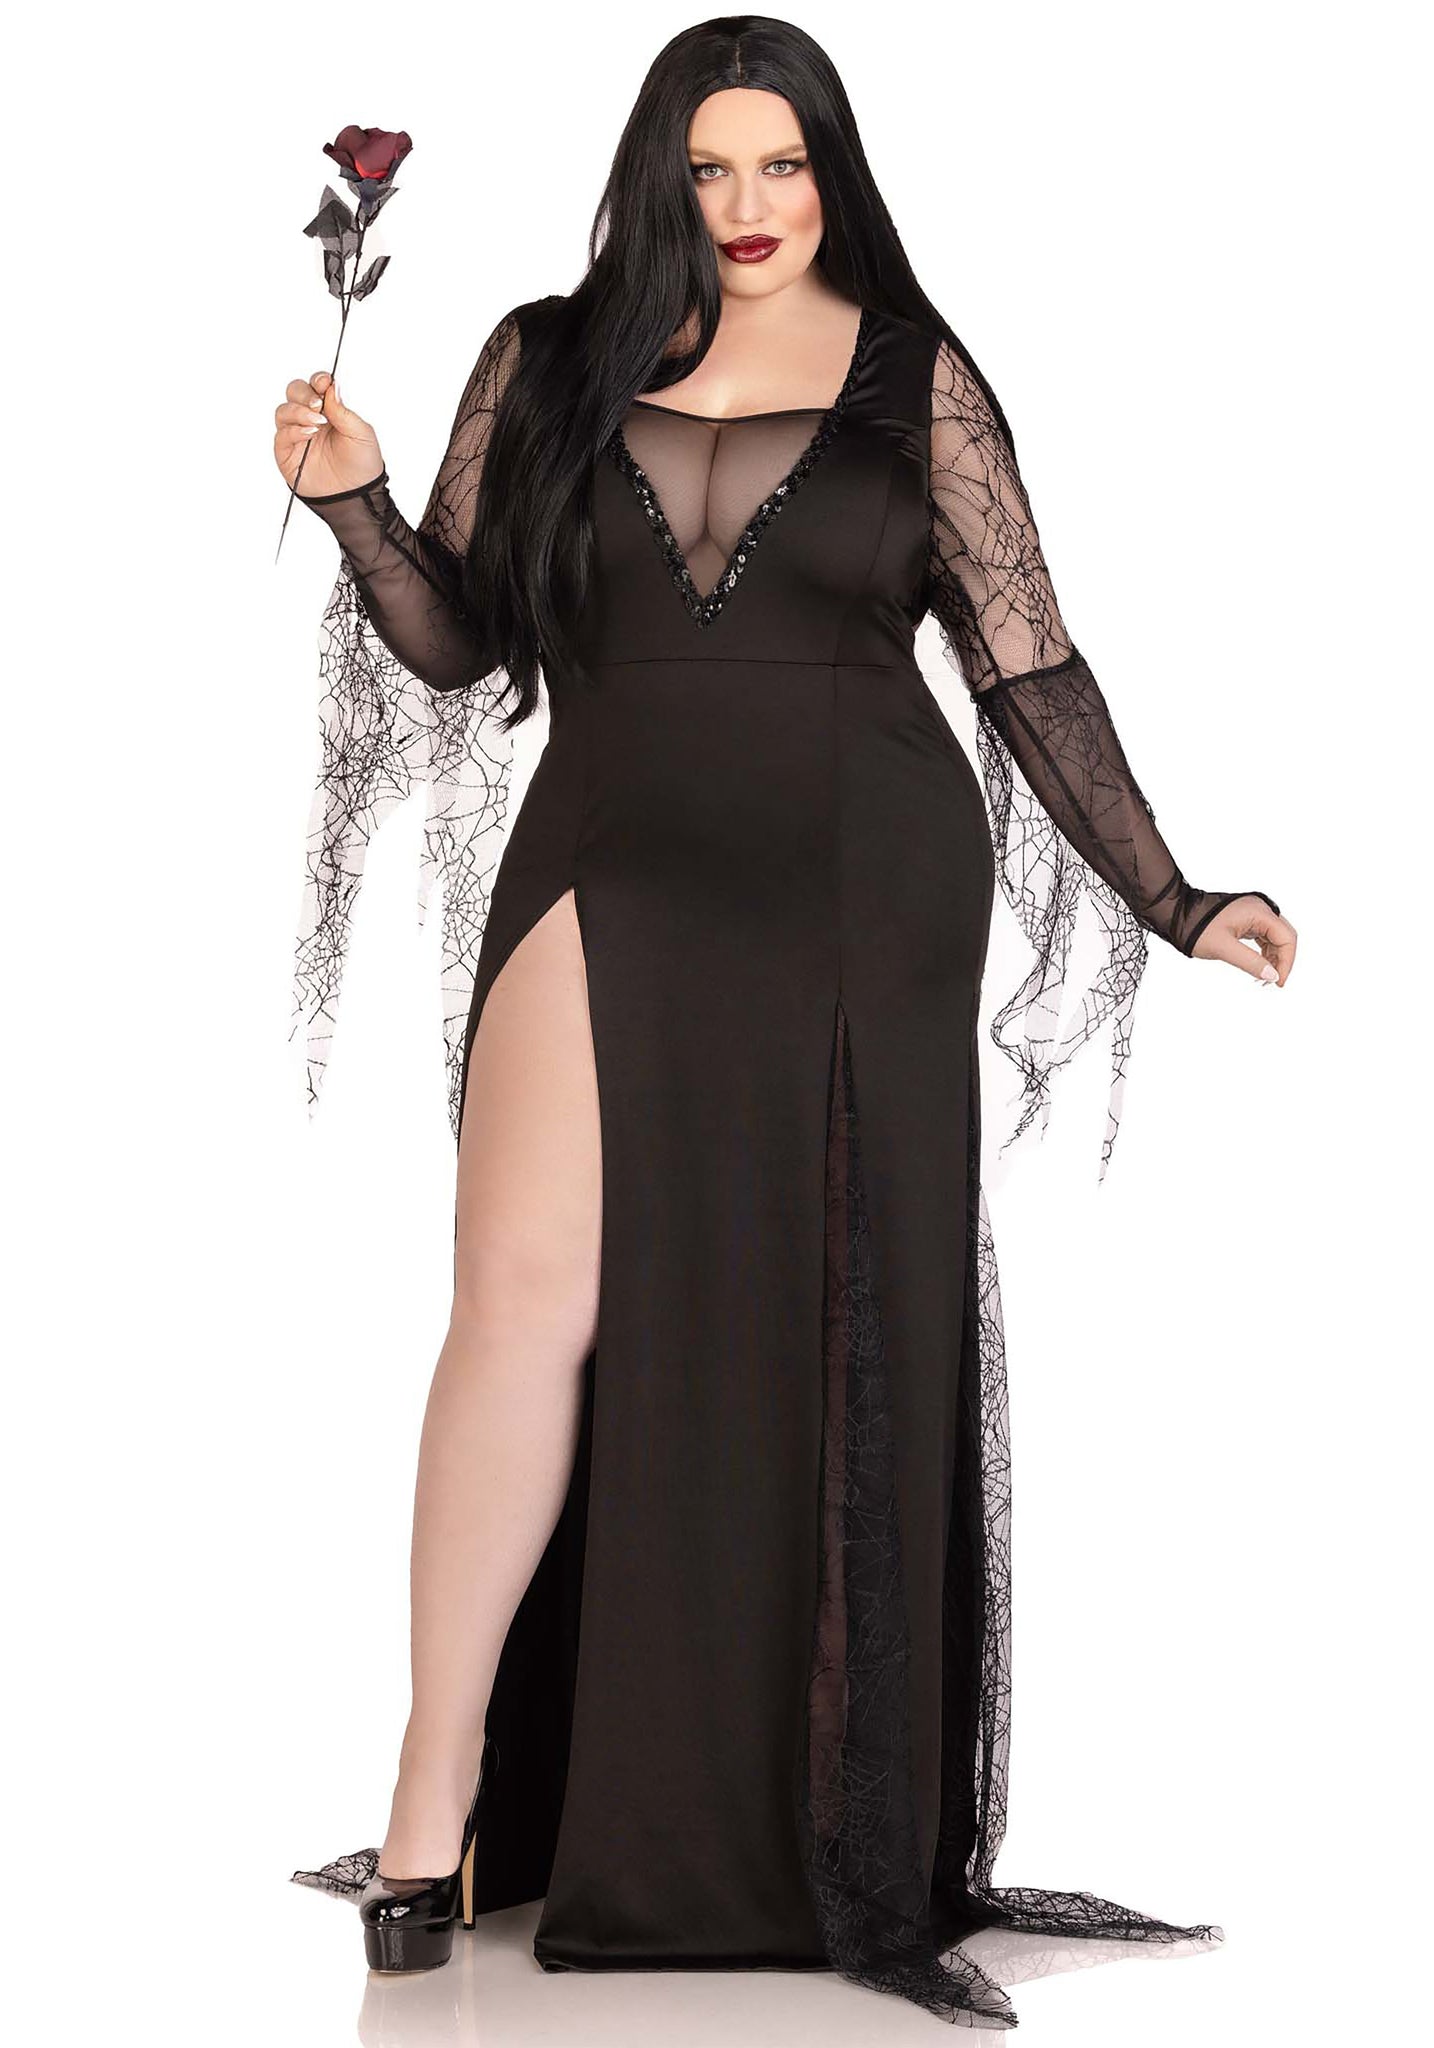 Immortal Witch Costume Gothic Vampire Black Lace Fancy Dress Womens SM-XL 